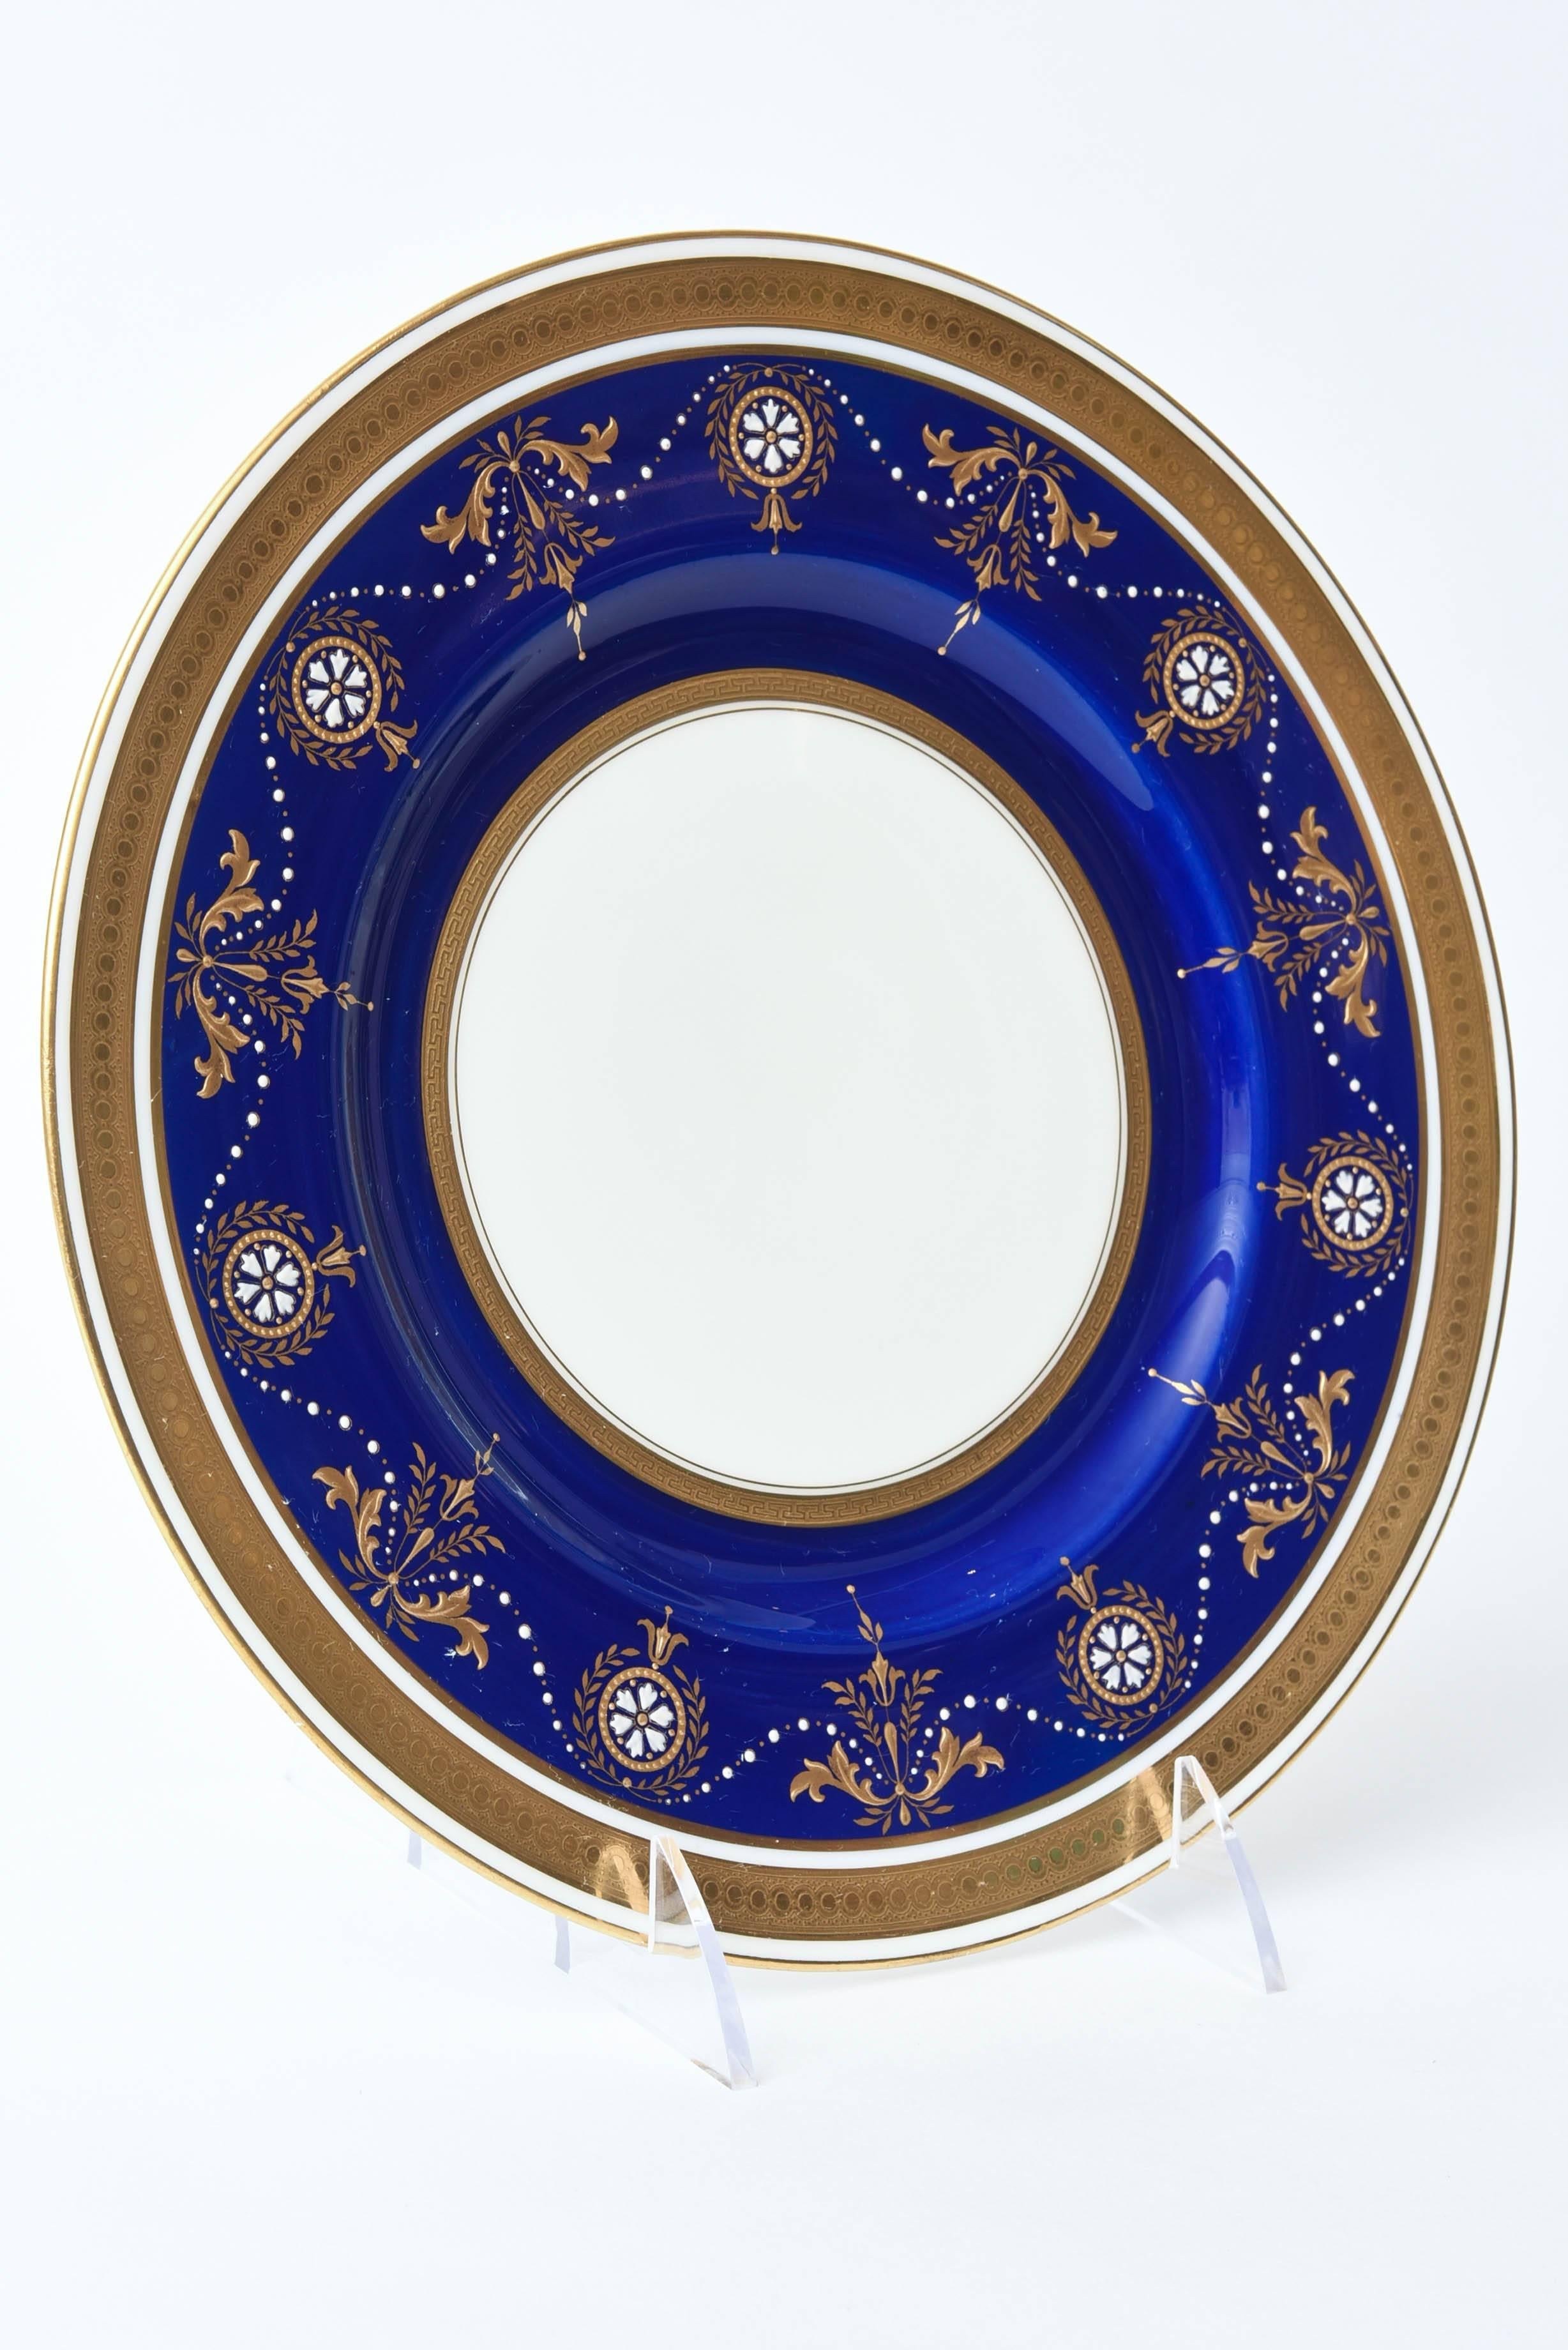 12 Antique Minton England Elaborate Cobalt Jewel & Gilt Encrusted Dinner Plates In Good Condition For Sale In West Palm Beach, FL